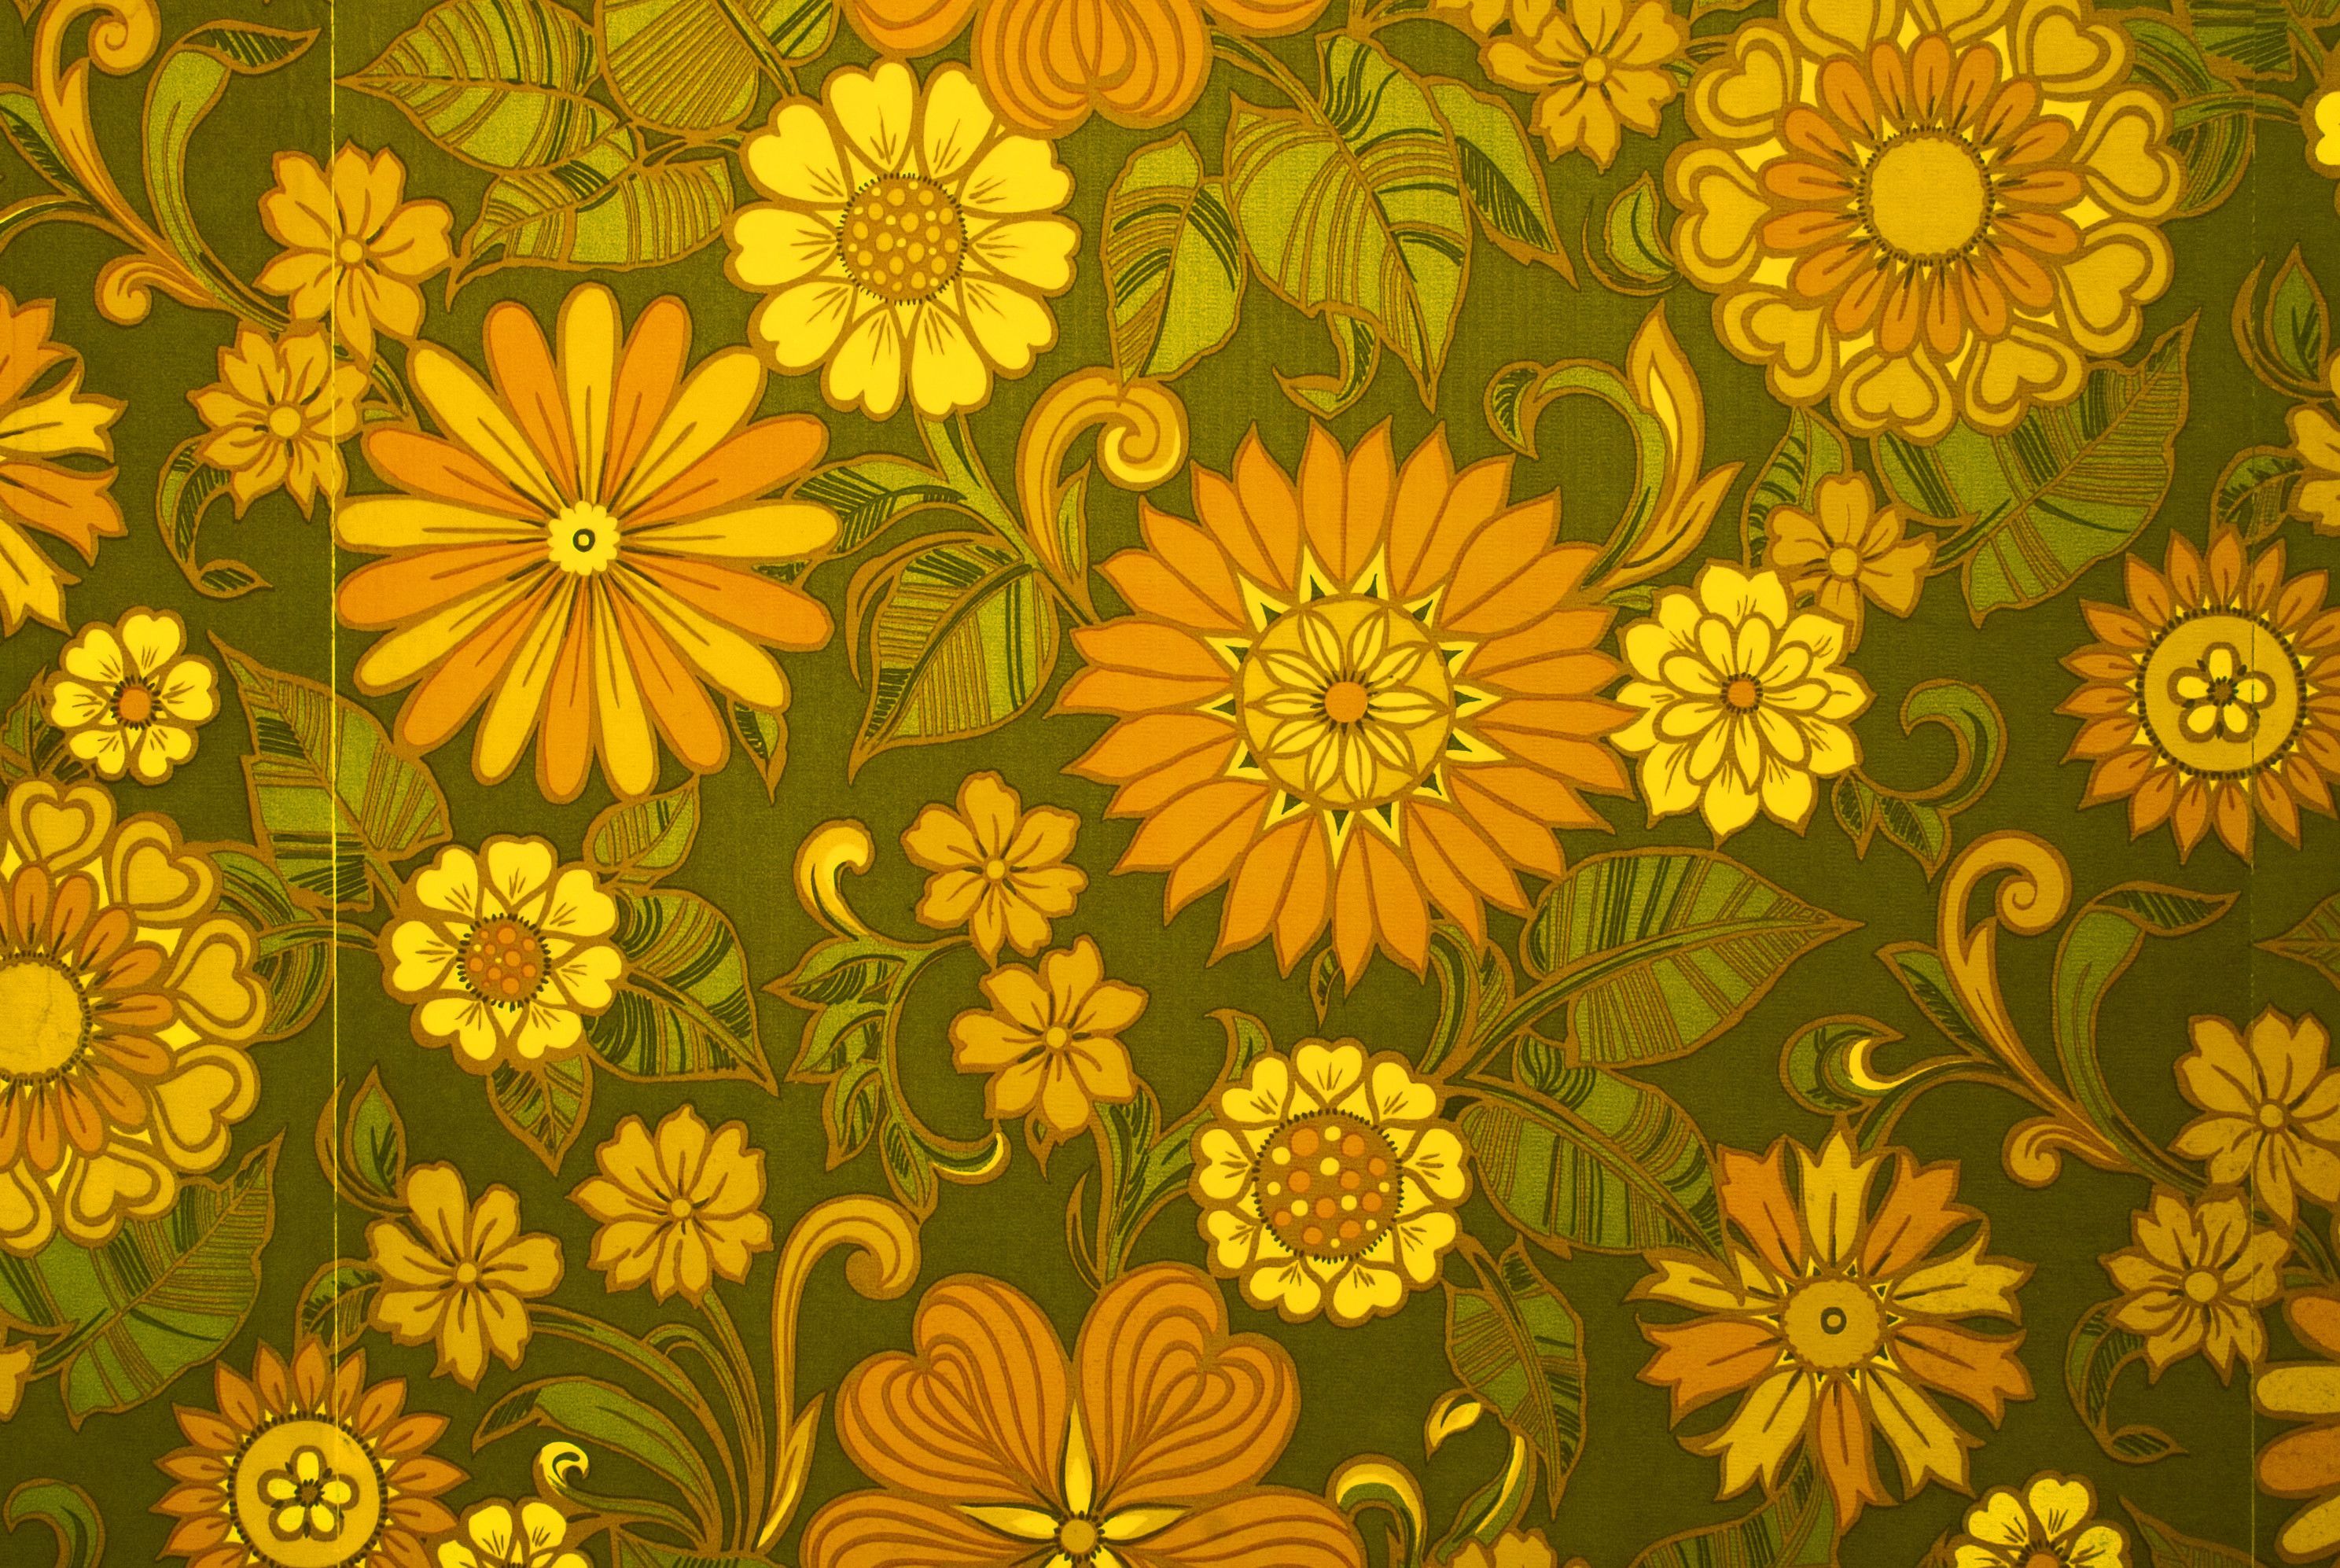 A seamless pattern of orange and yellow flowers - 70s